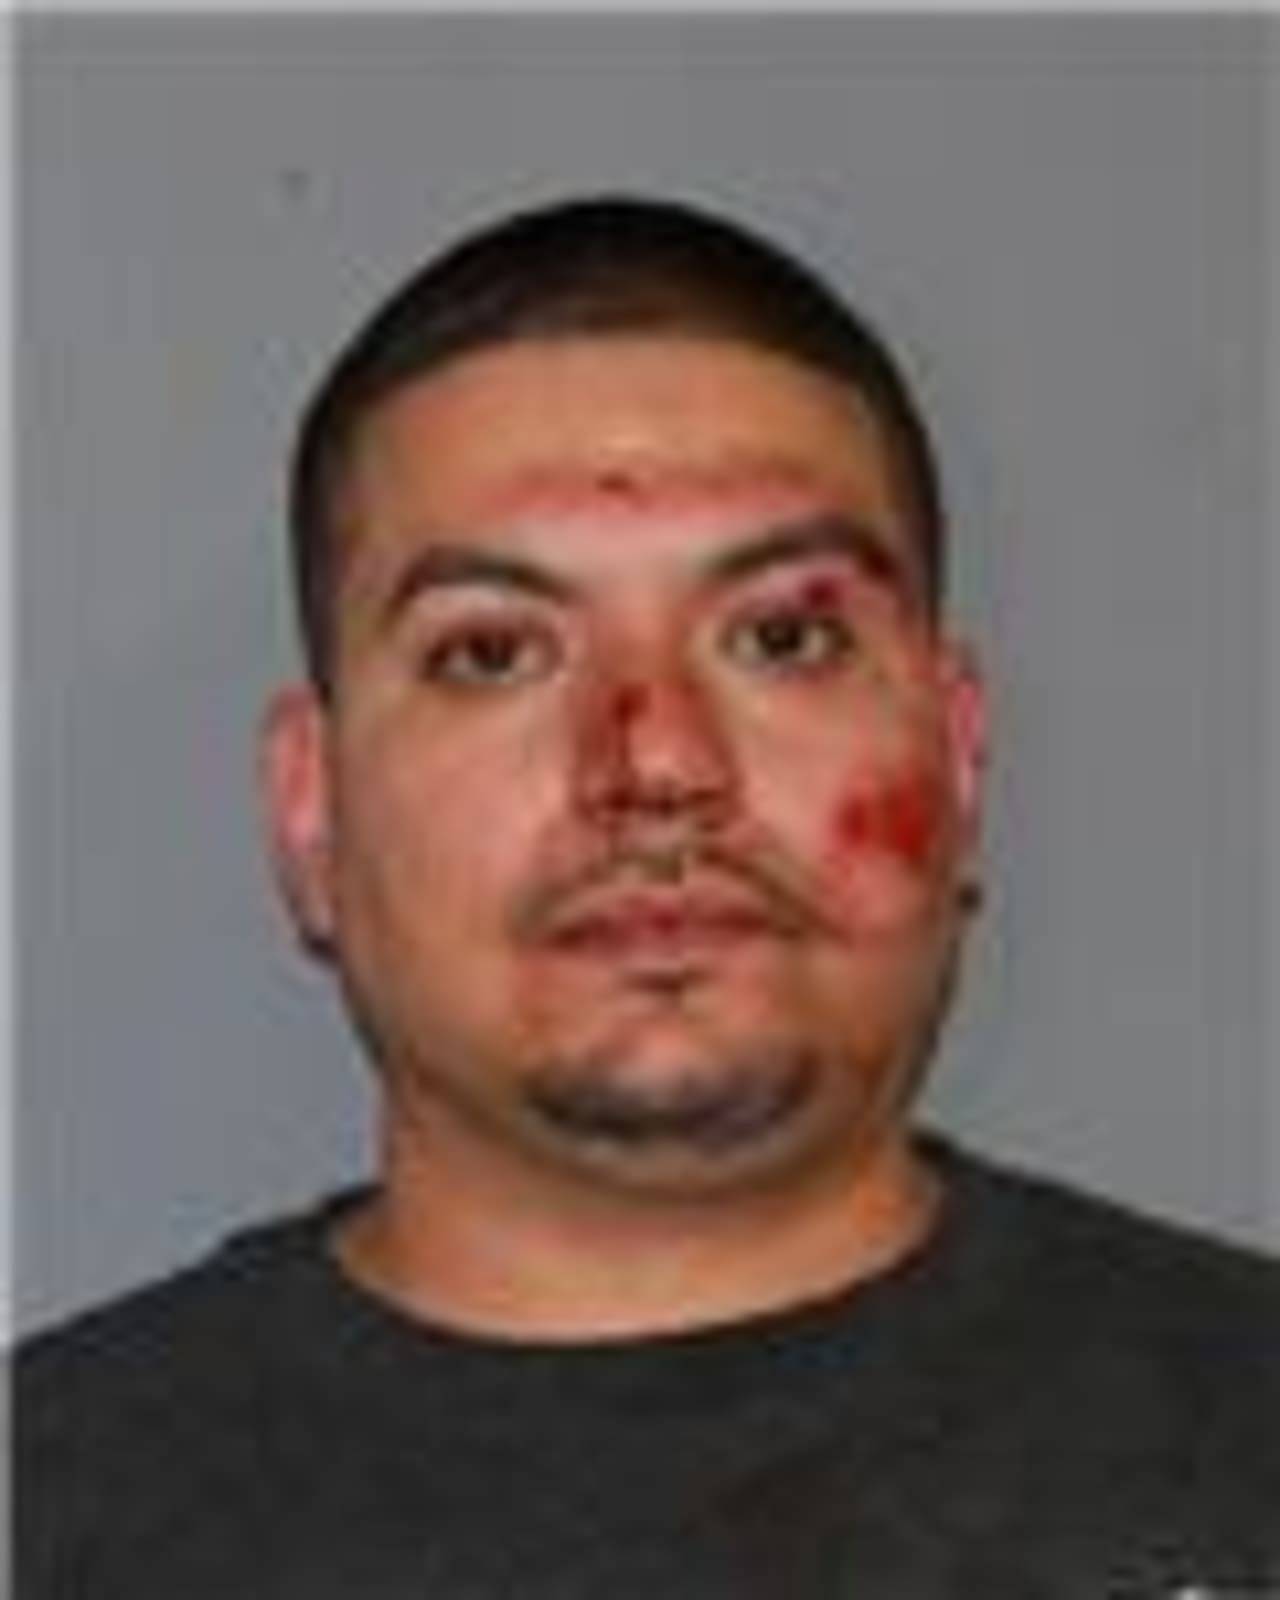 Angel Garcia, 36, was charged with driving while intoxicated, third-degree unlawful fleeing a police officer and reckless driving, according to police.